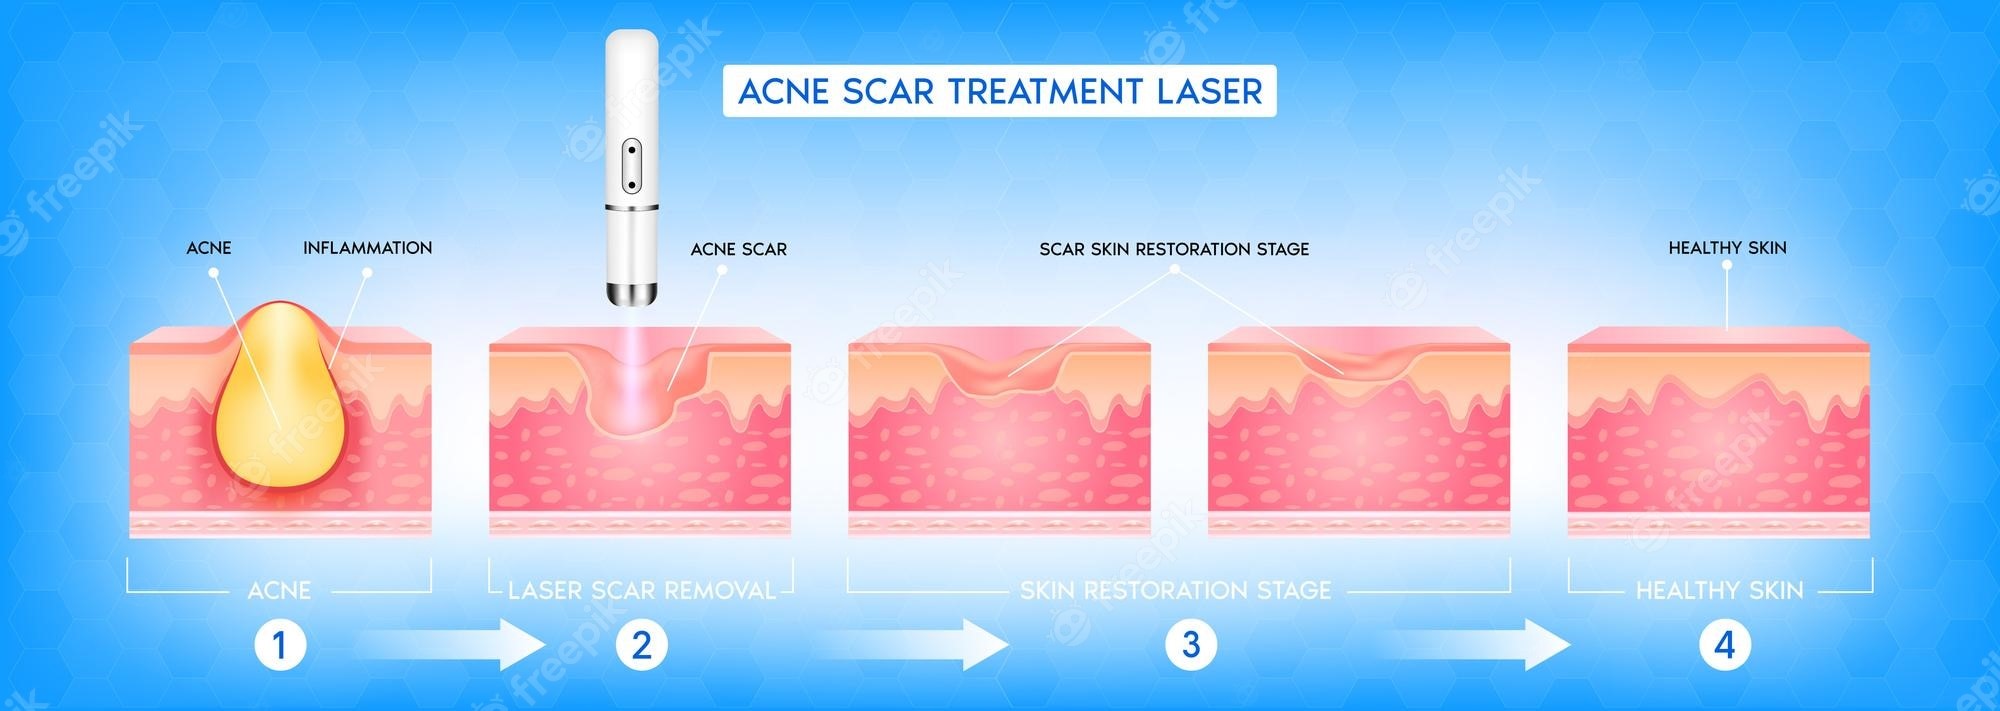 Fraxel Laser Treatment for Acne Scars